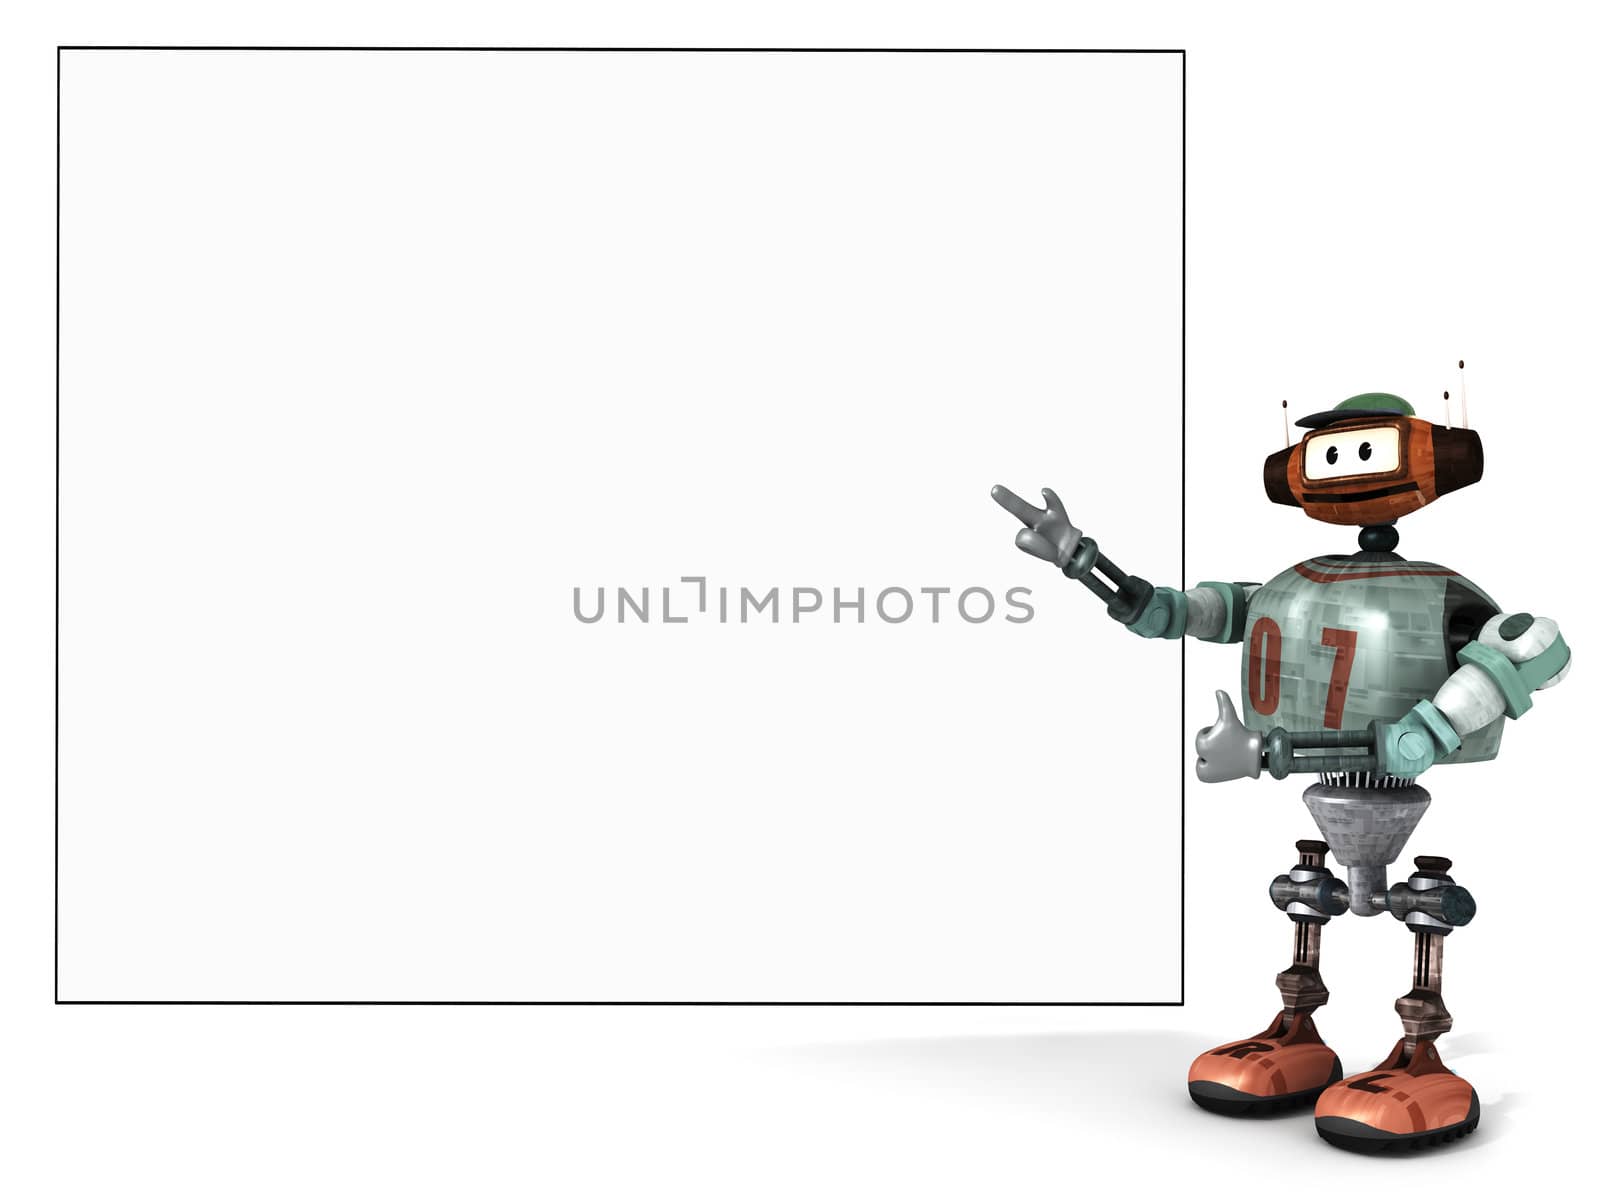 Djoby the robot showing proudly a big empty poster by shkyo30